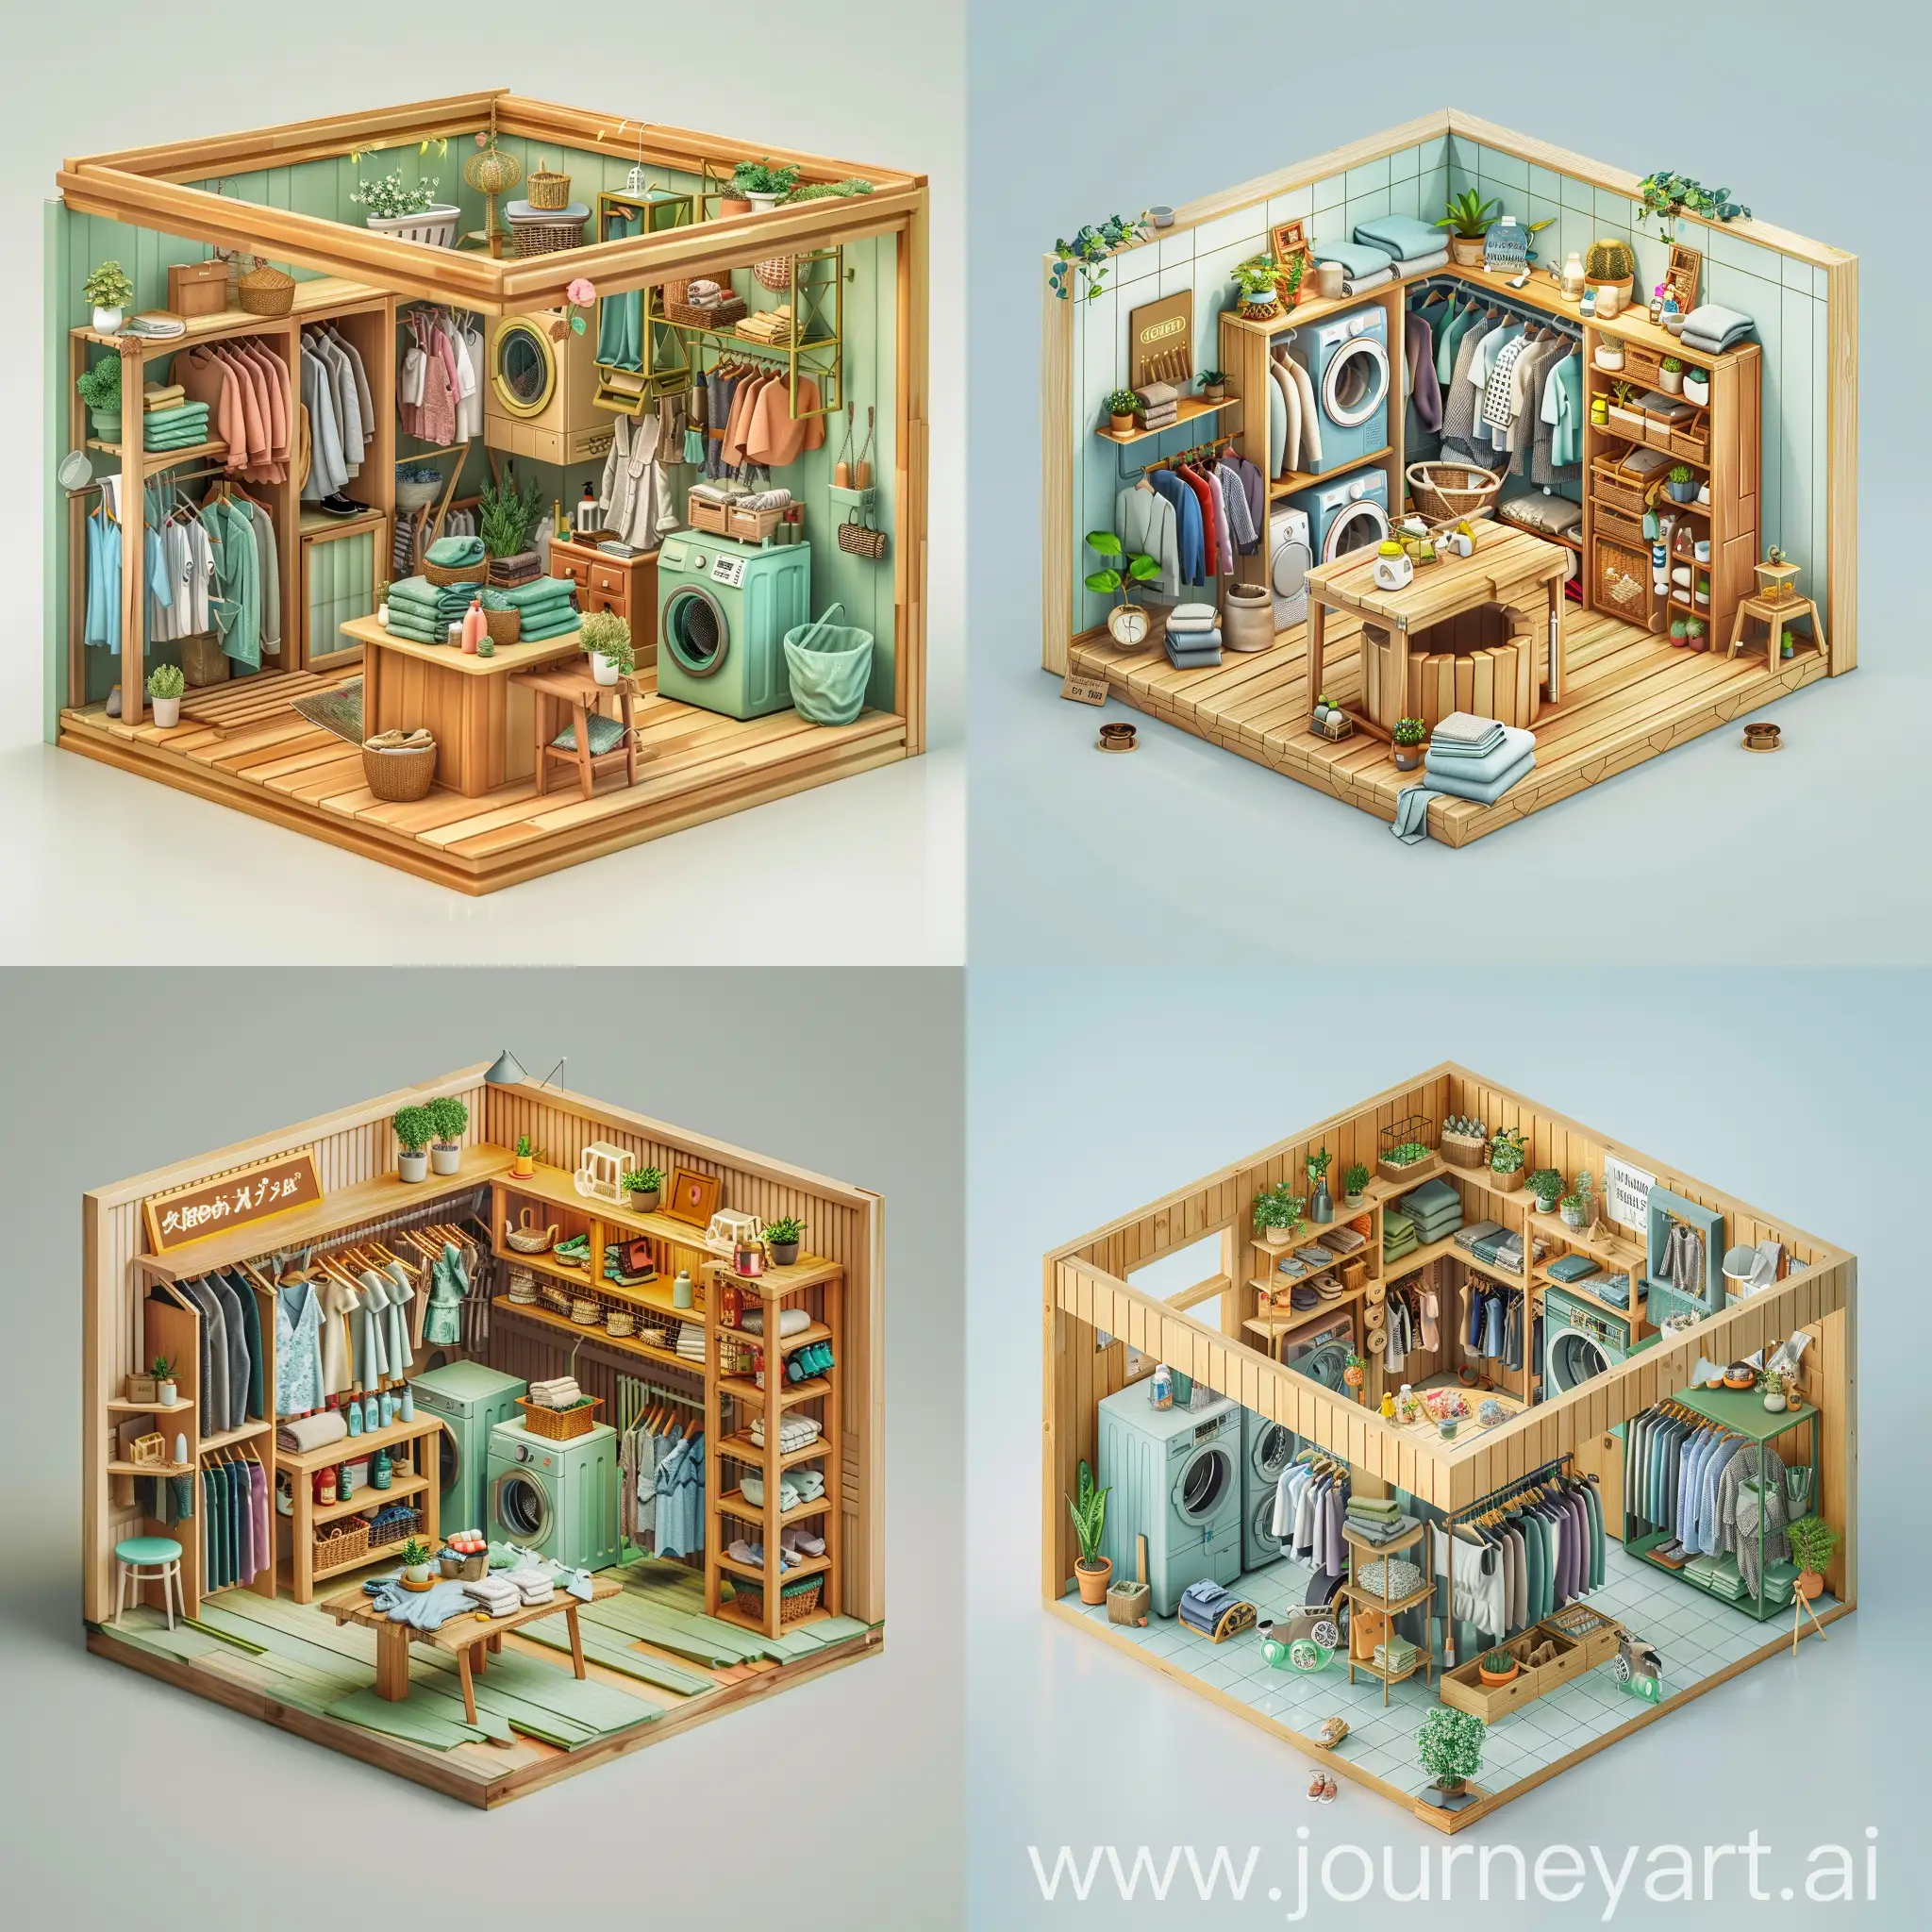 small size, cluttered, interior, aesthetic, old fashion, mid century, Scandinavian, mint theme, wooden laundry shop. with well full of clothes, wardrobe, dryers and washing machines left, shelves, table at center, some plants. cartoon, isometric, 3d, game style on blank background. The model should be appropriate with a cube shape, quality in 4k